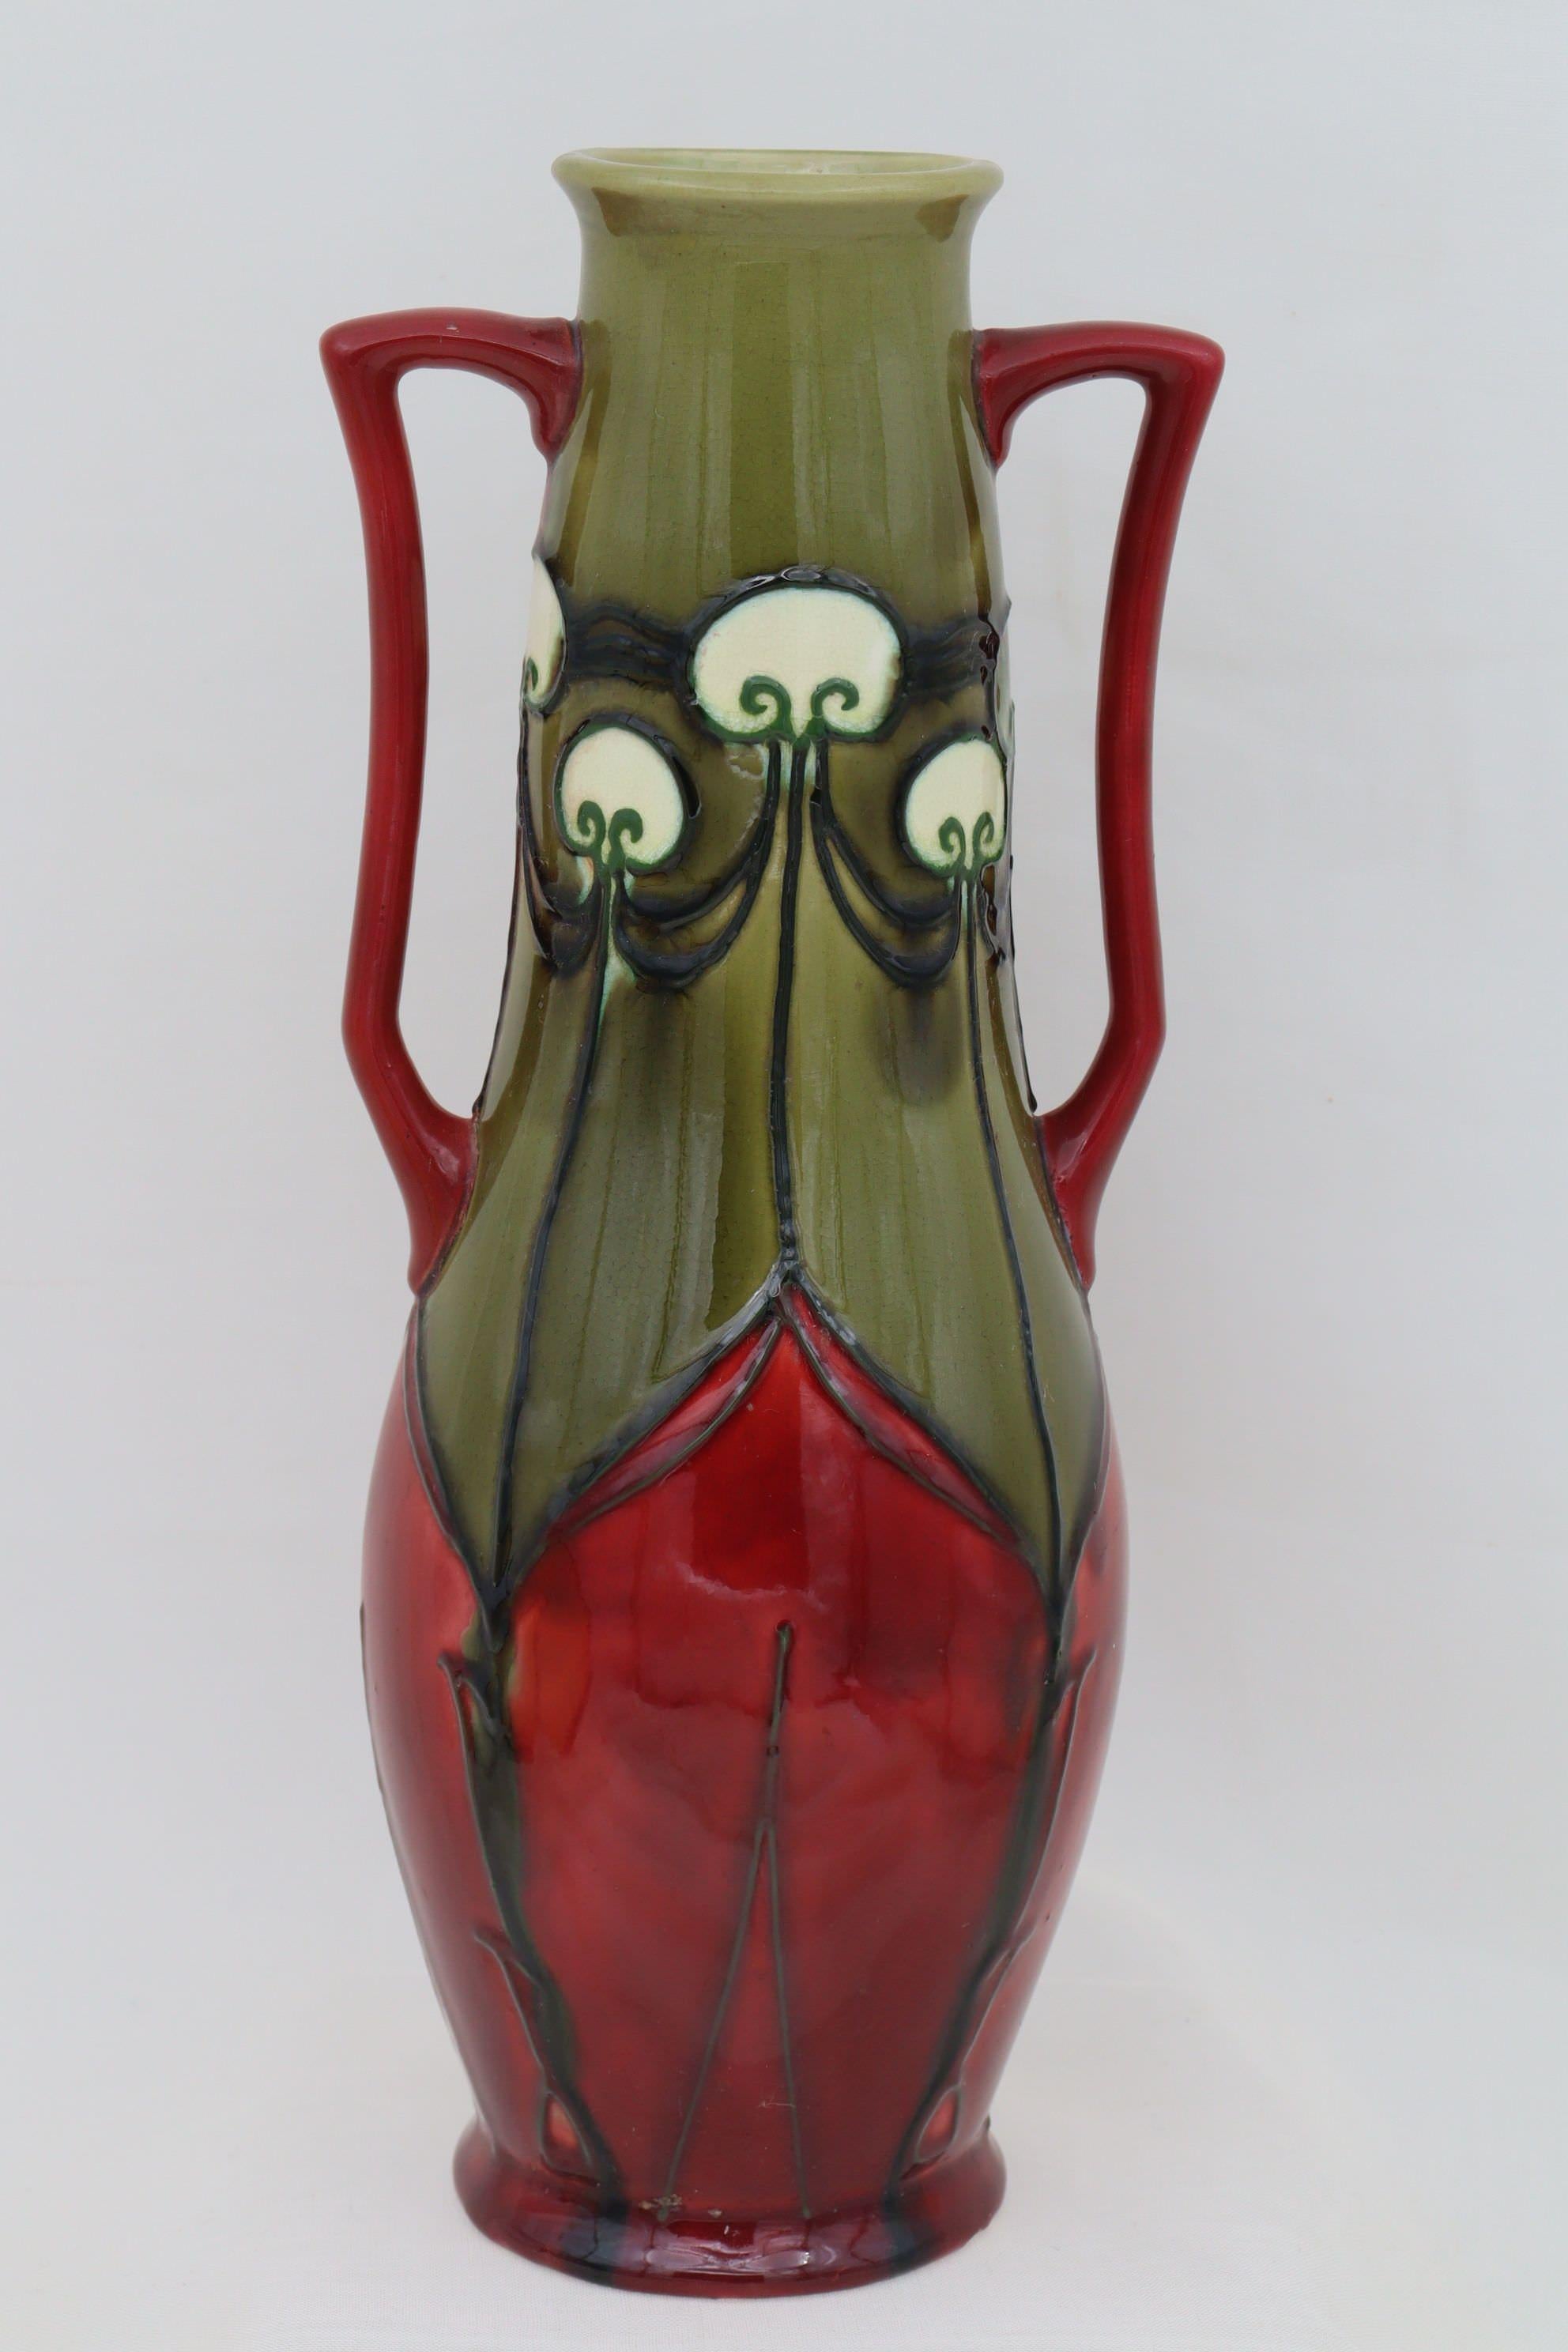 This Minton vase is from their Secessionist ware range and is decorated with the pattern number 10. The pattern is outlined by tube lining then filled with majolica glazes, in this case red, olive green and white. The shape number is 3747 which is a